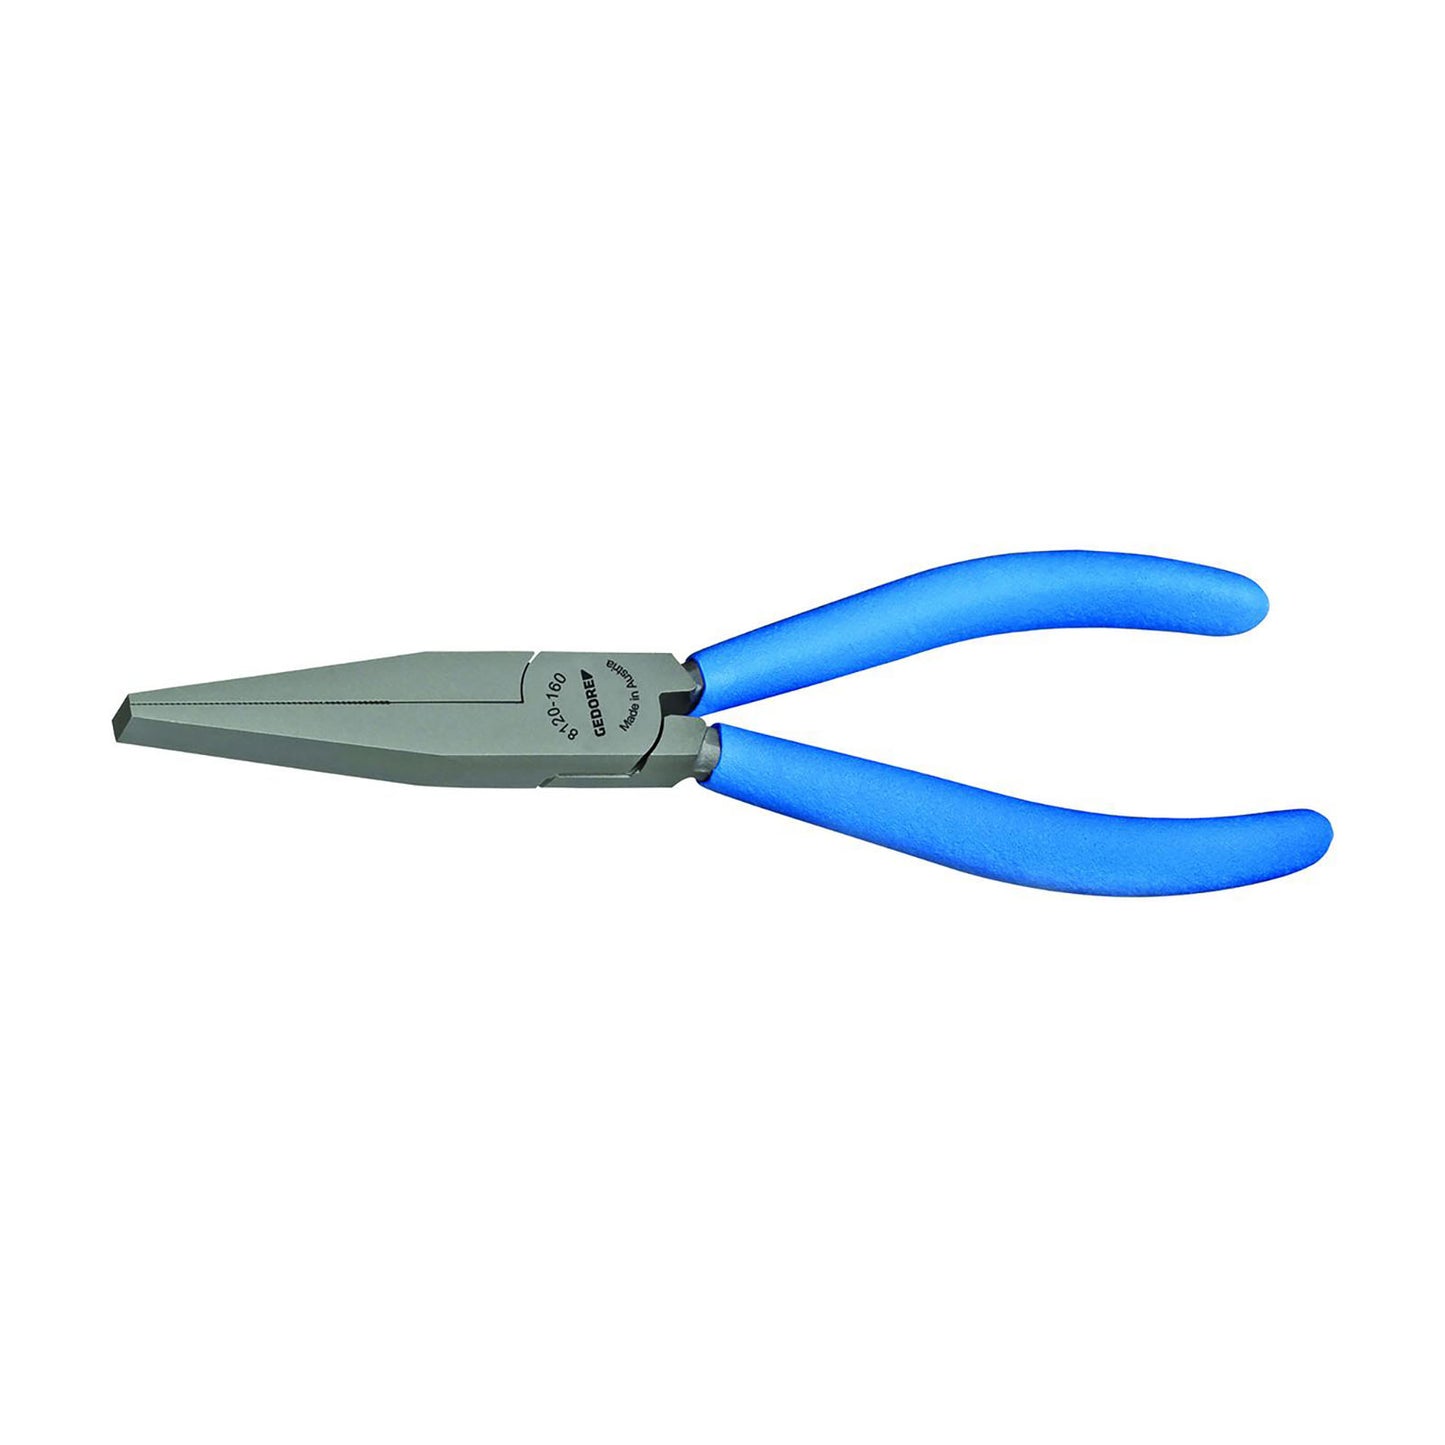 GEDORE 8120-160 TL - Flat nose pliers 160 mm (6710370)